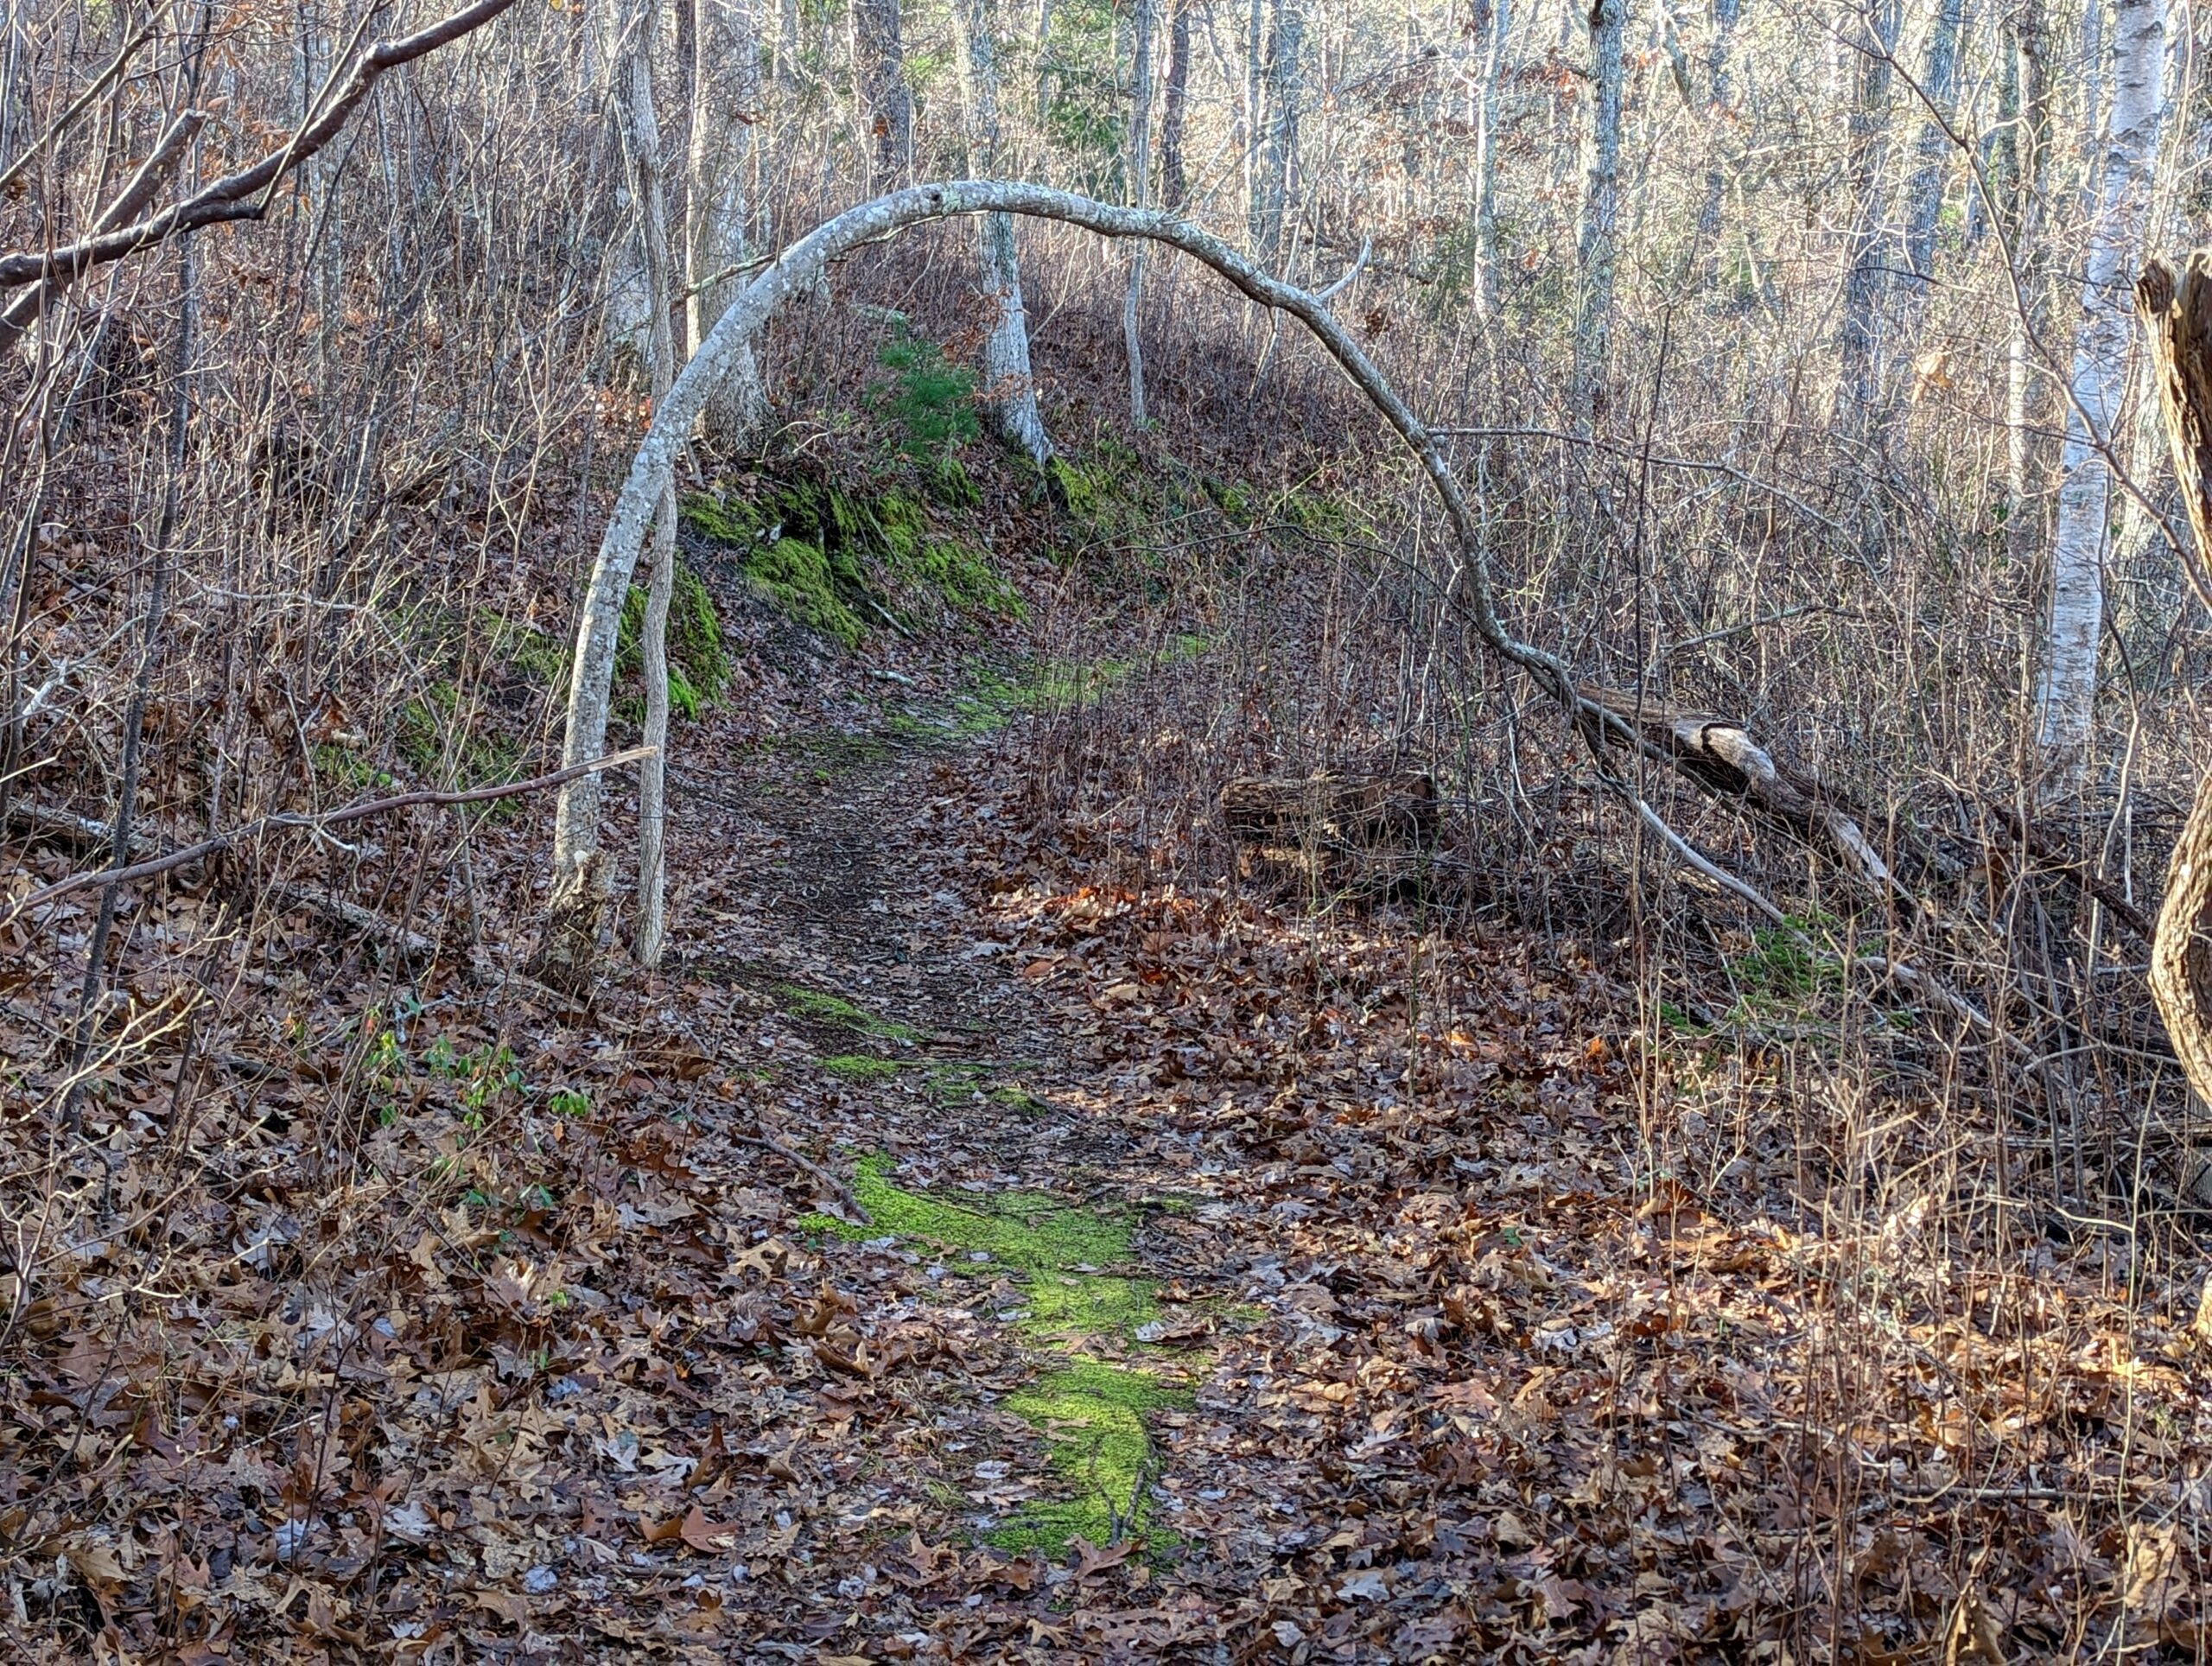 Arch formed by tree over walking path